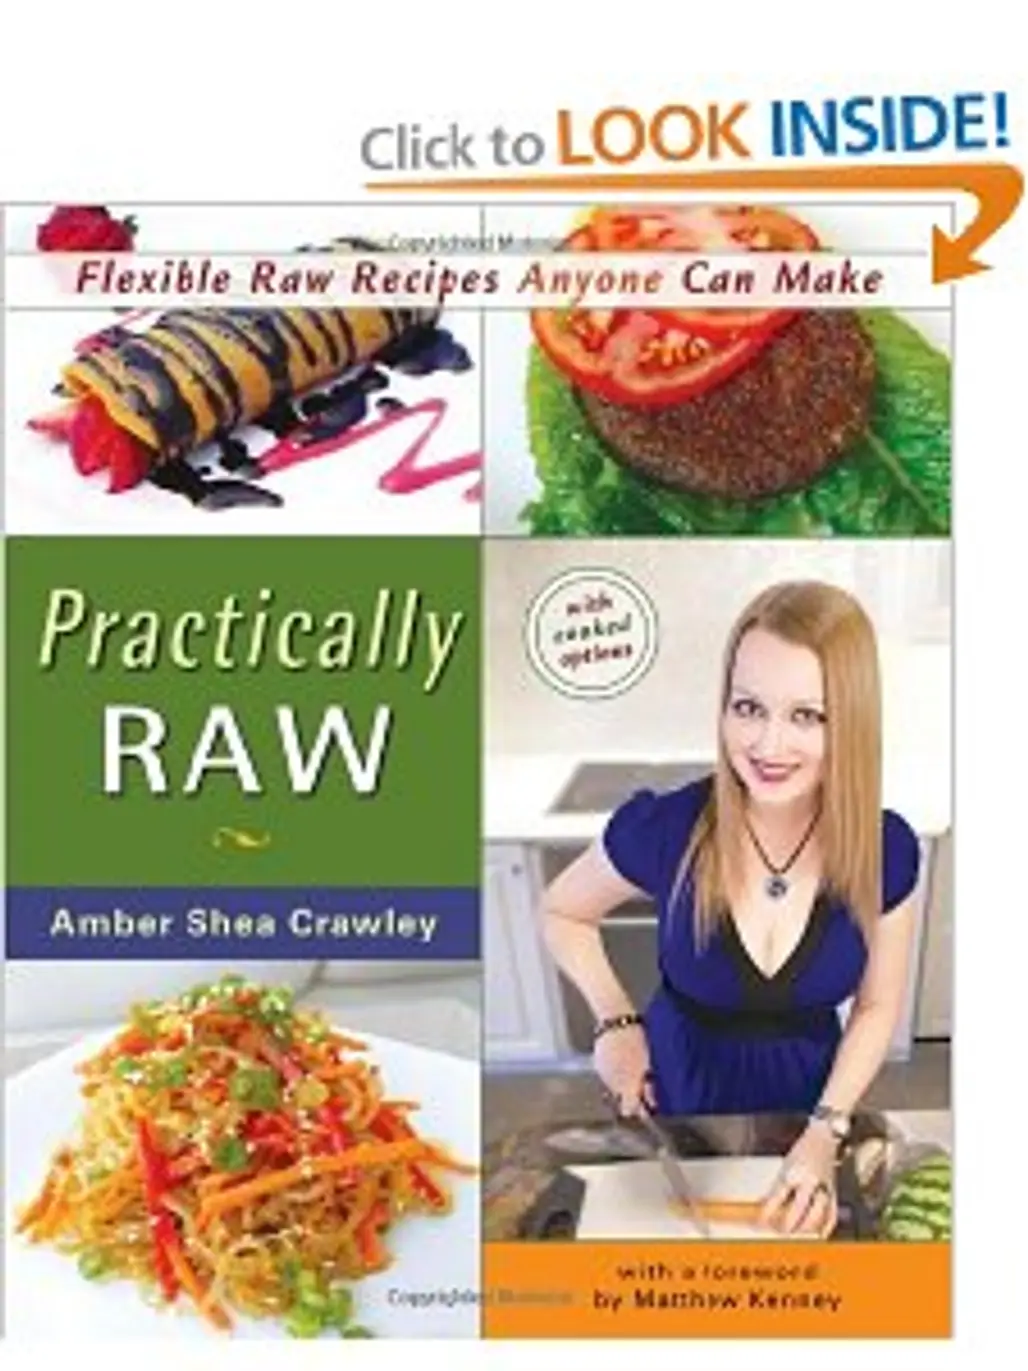 Perfectly Raw by Chef Amber Shea